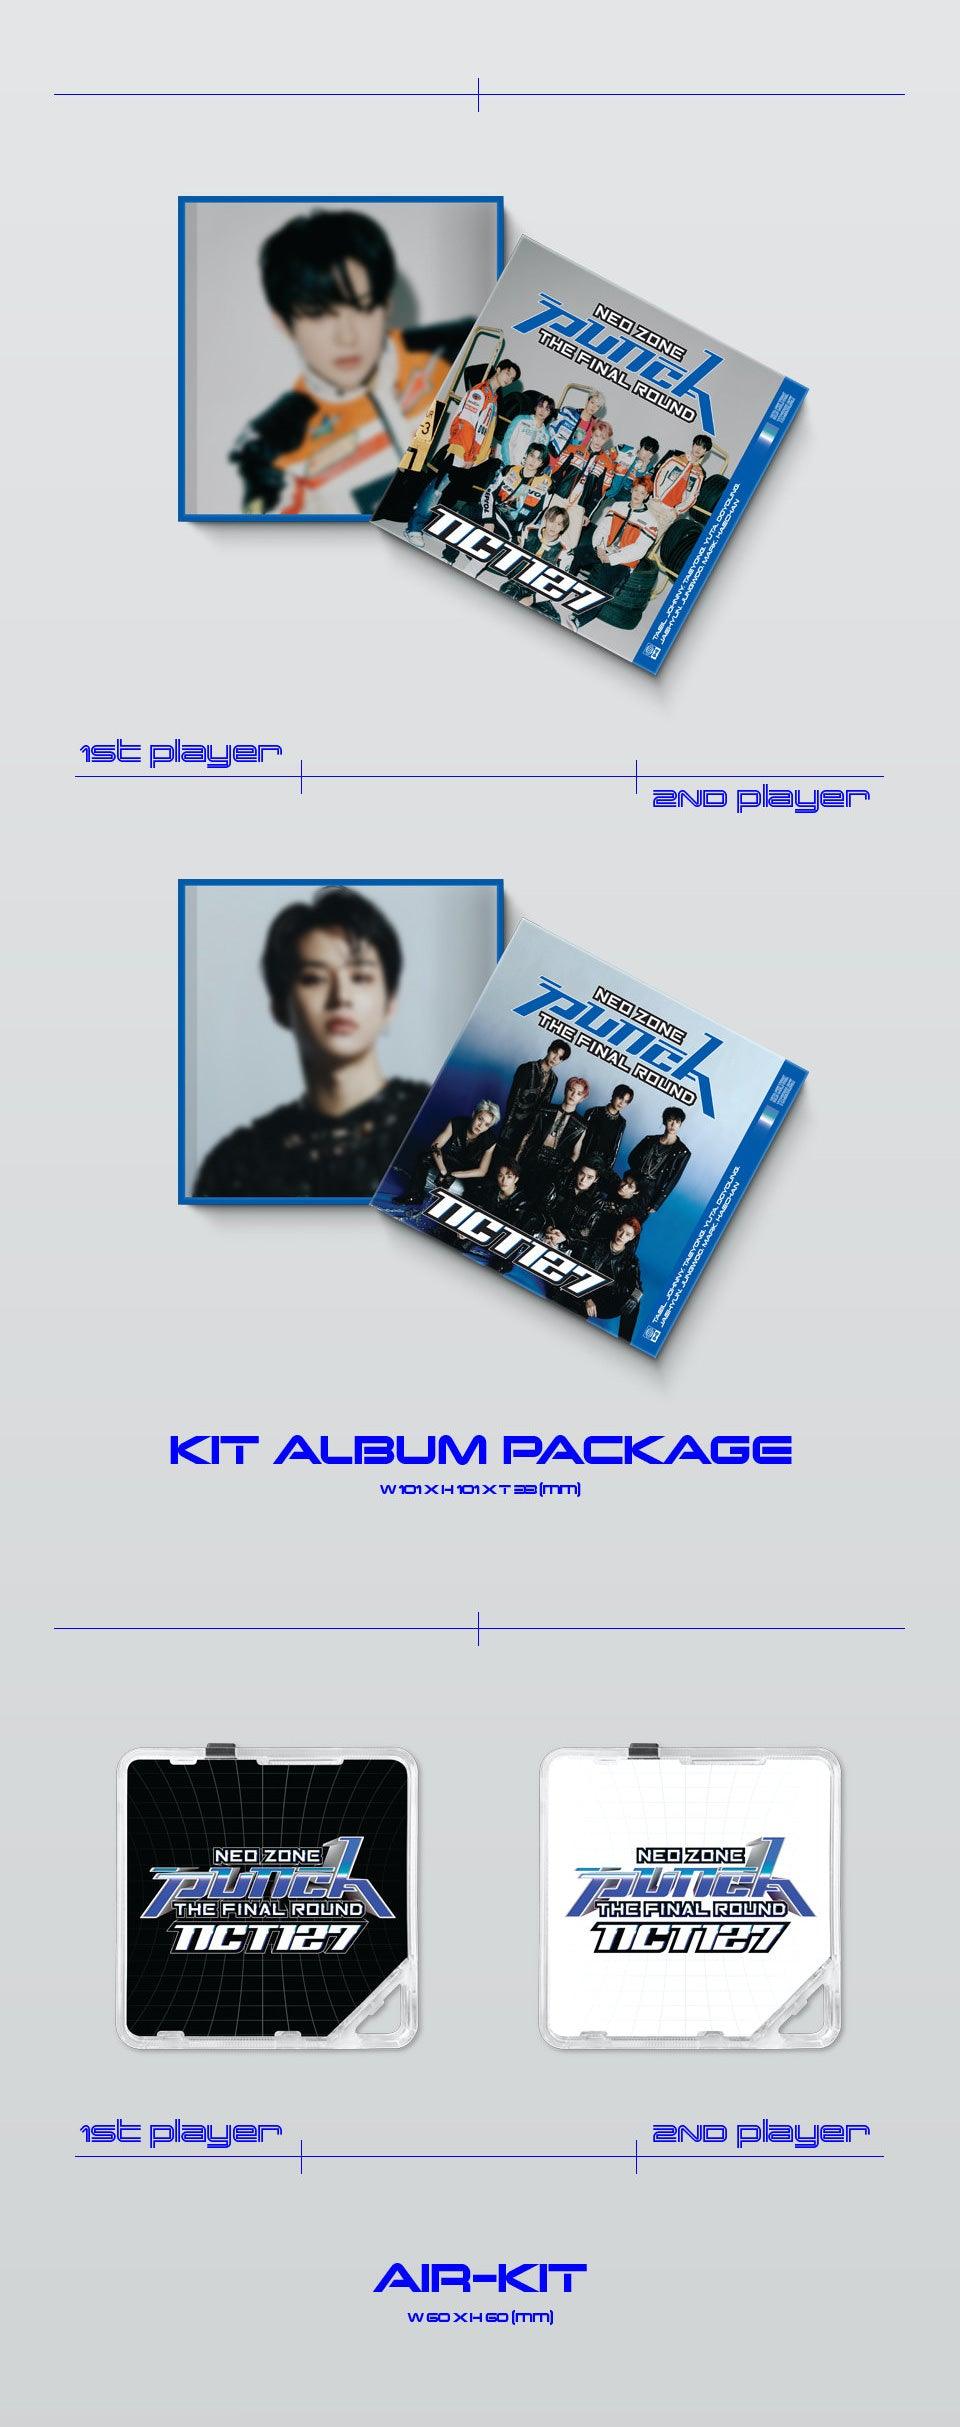 NCT 127 - NEO ZONE Vol 2. Repackage - The Final Round - Kit Album - J-Store Online